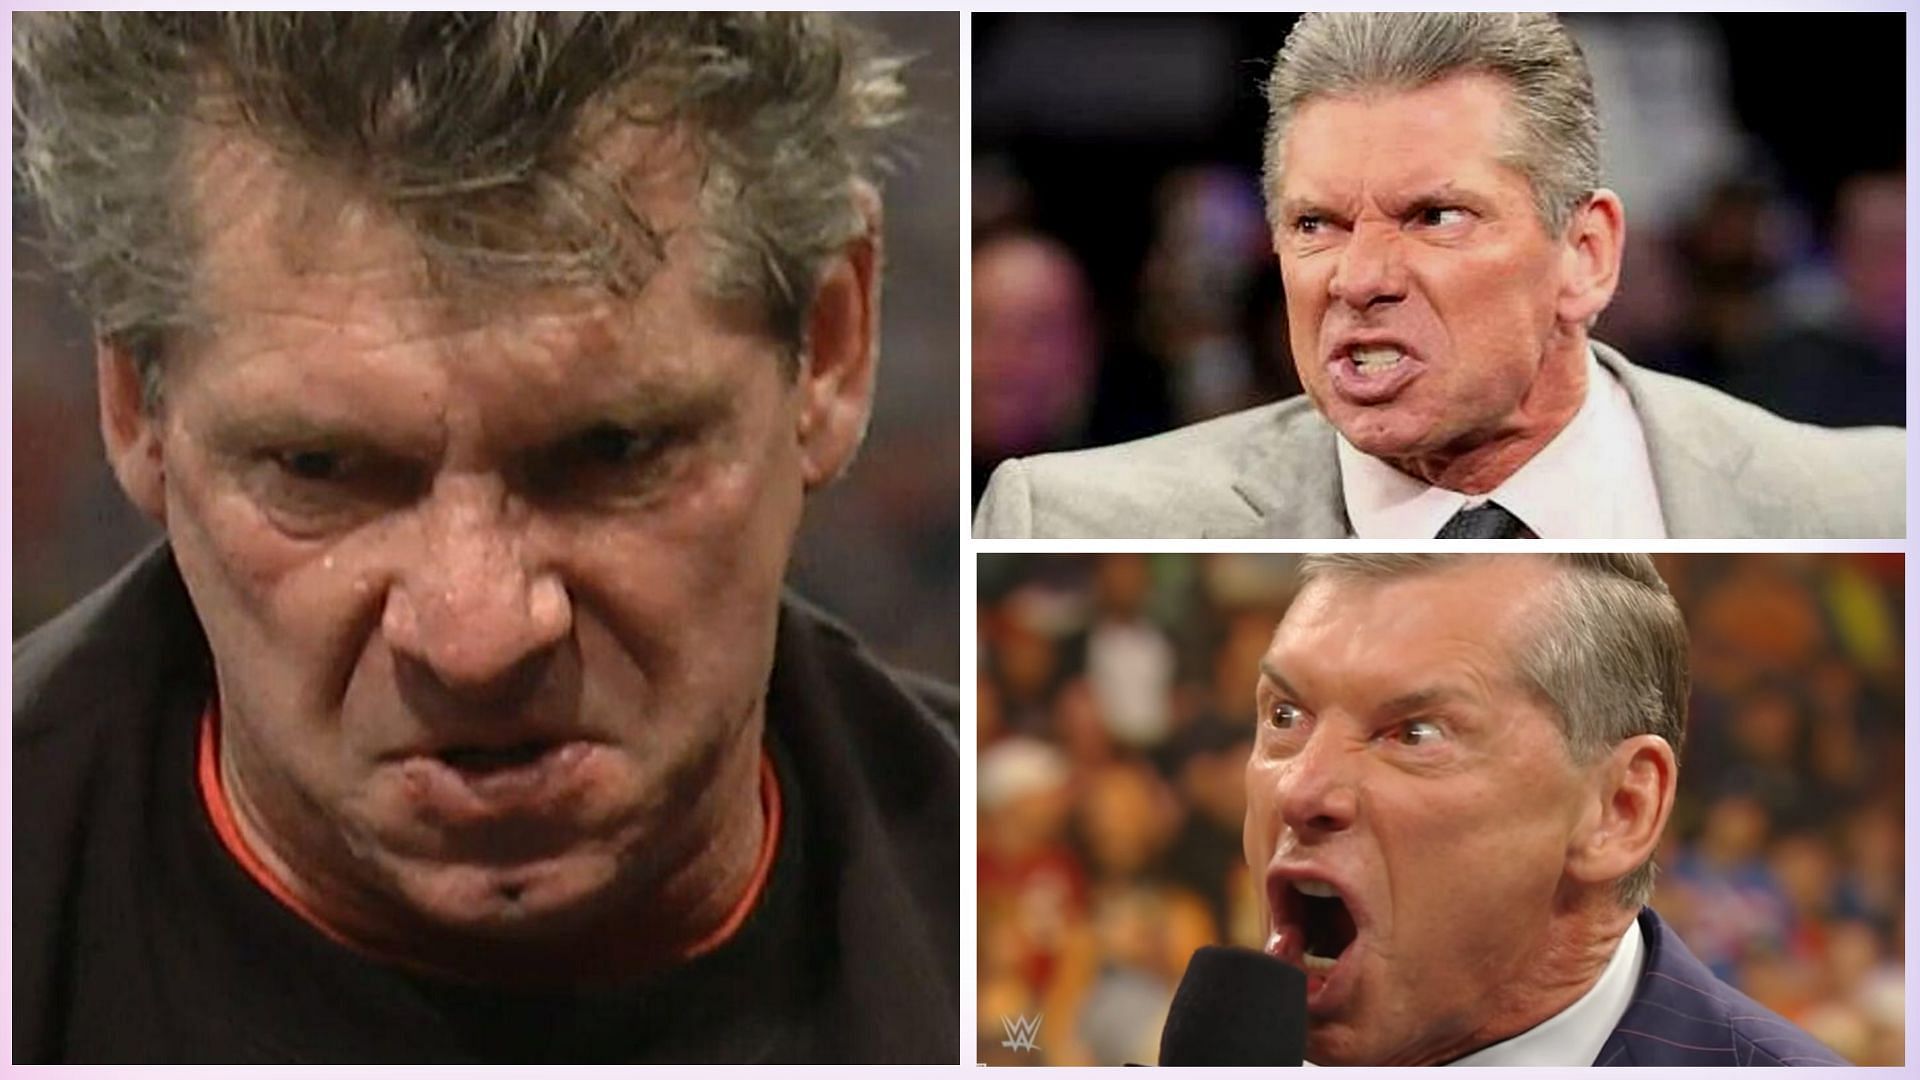 Vince McMahon has recently entered WWE Board of Directors.